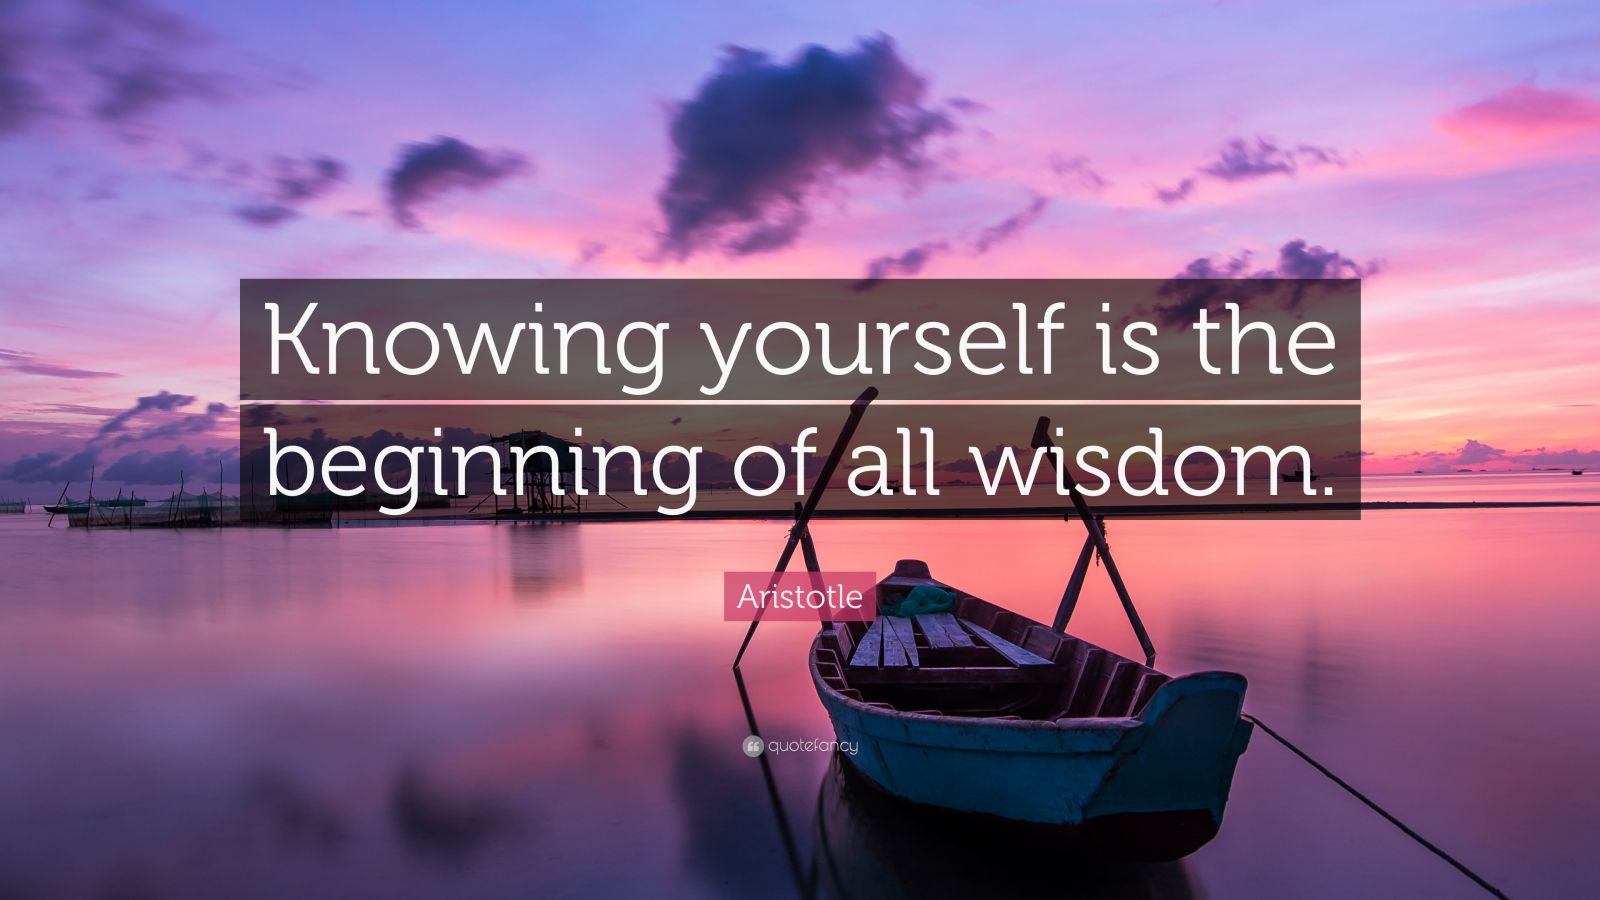 Aristotle Quote: “Knowing yourself is the beginning of all wisdom.” (22